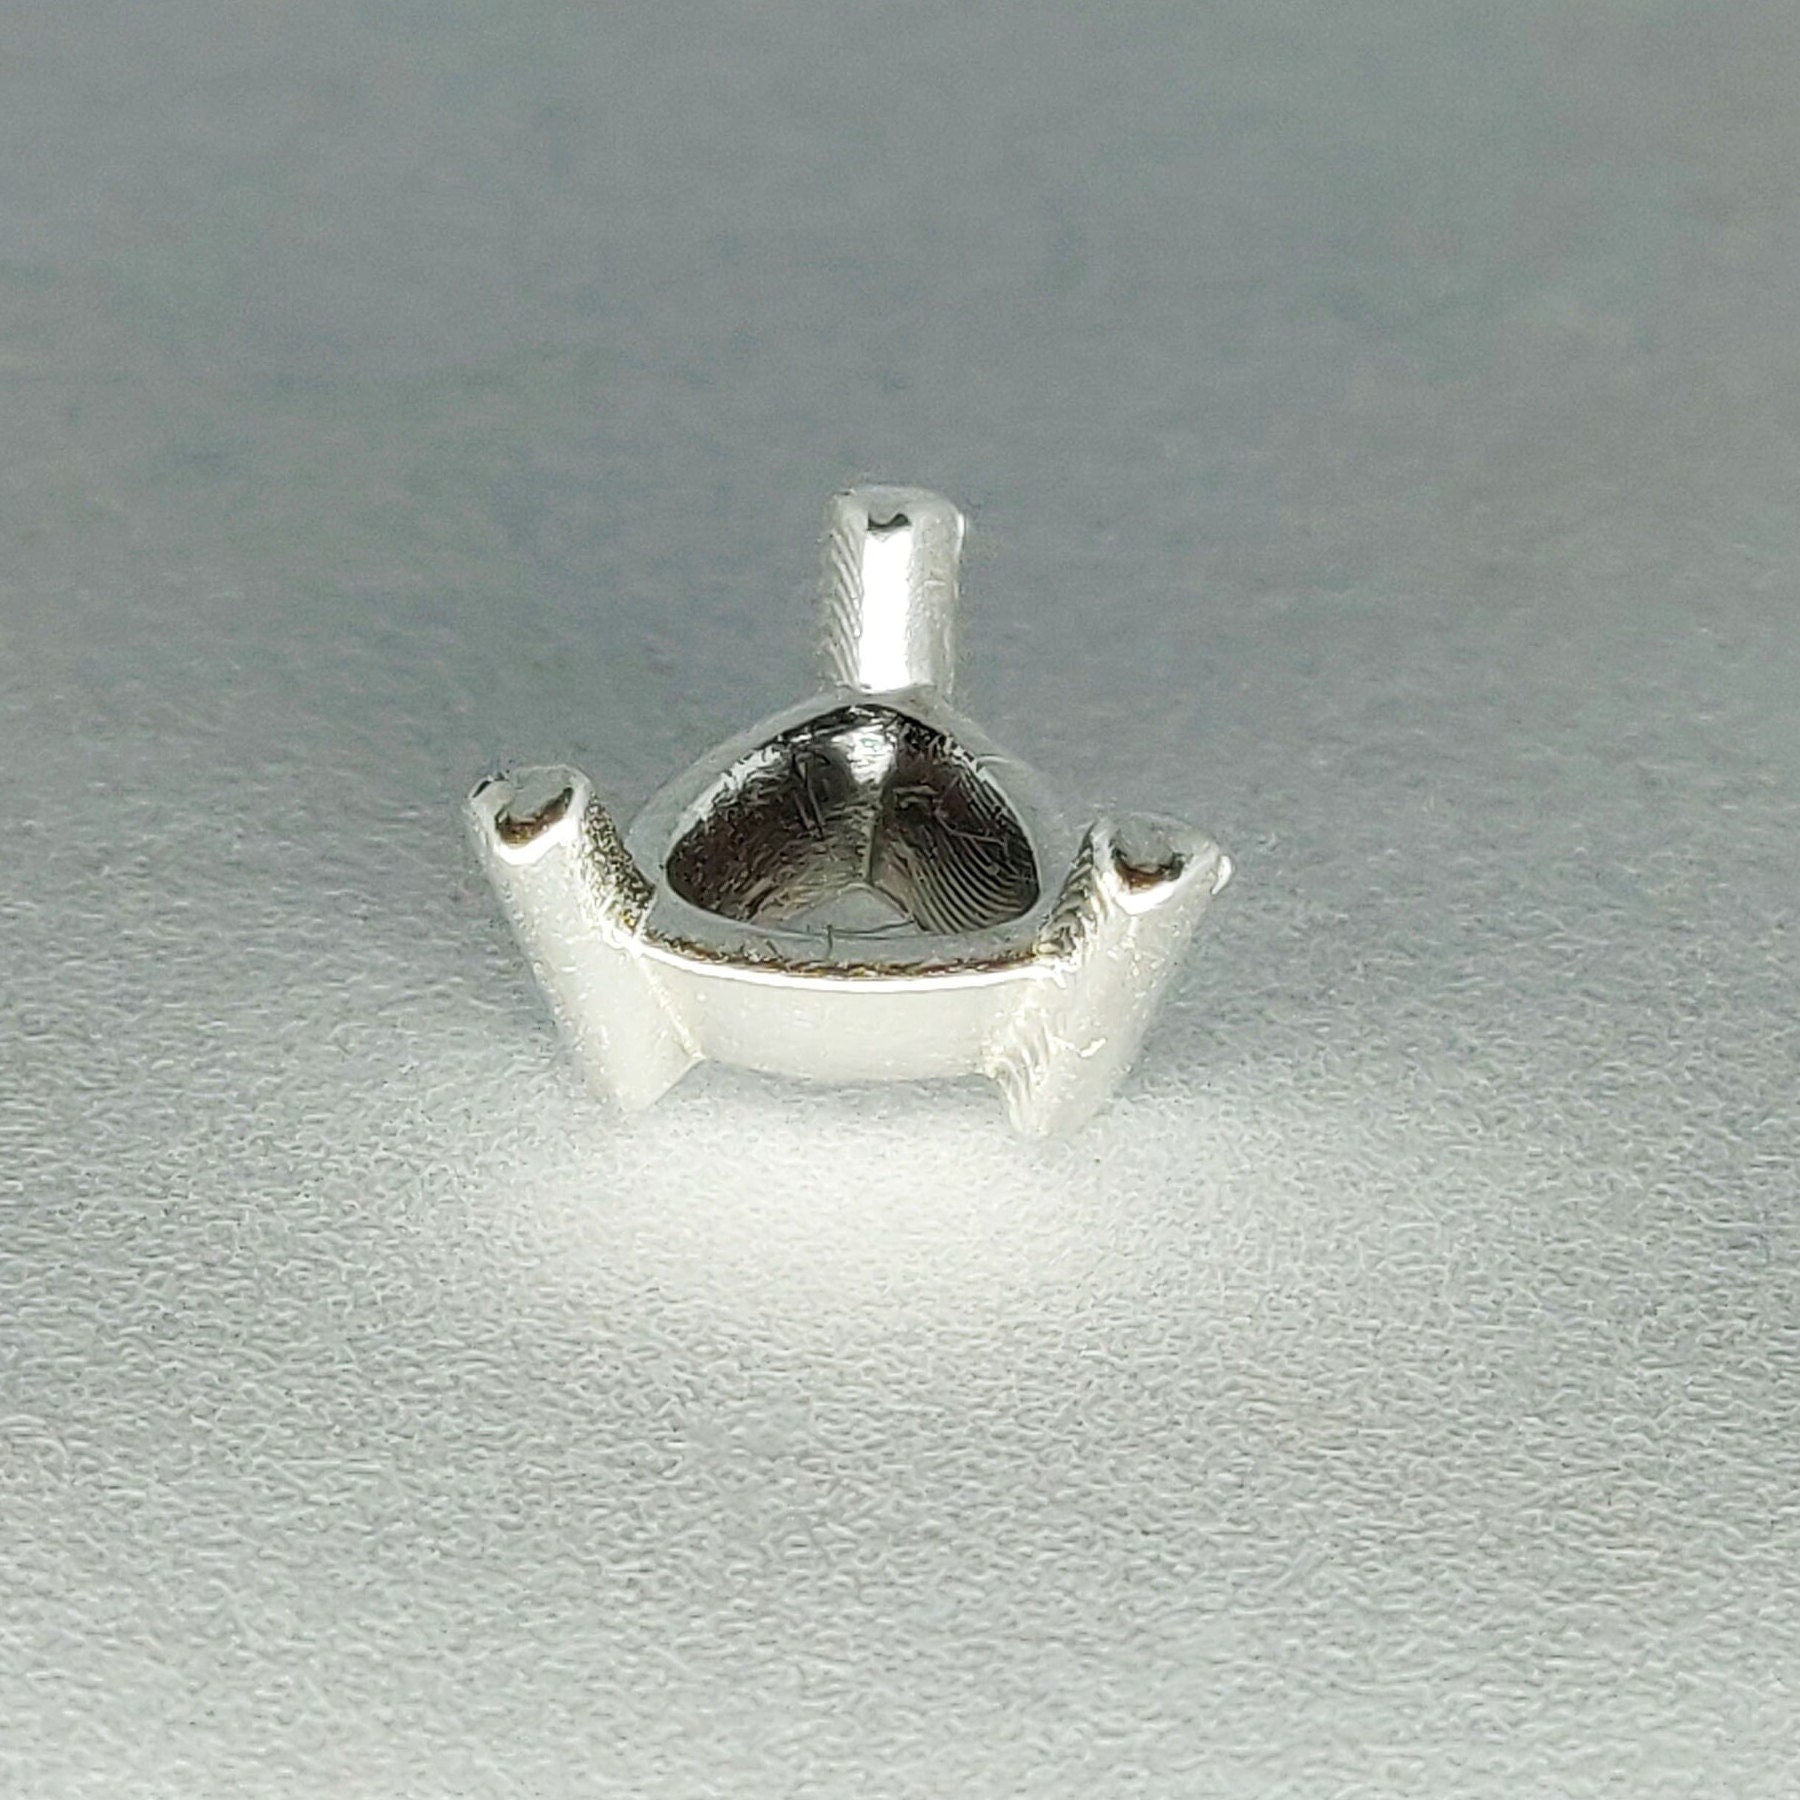 Profile view of a silver trillion prong setting on a white background.